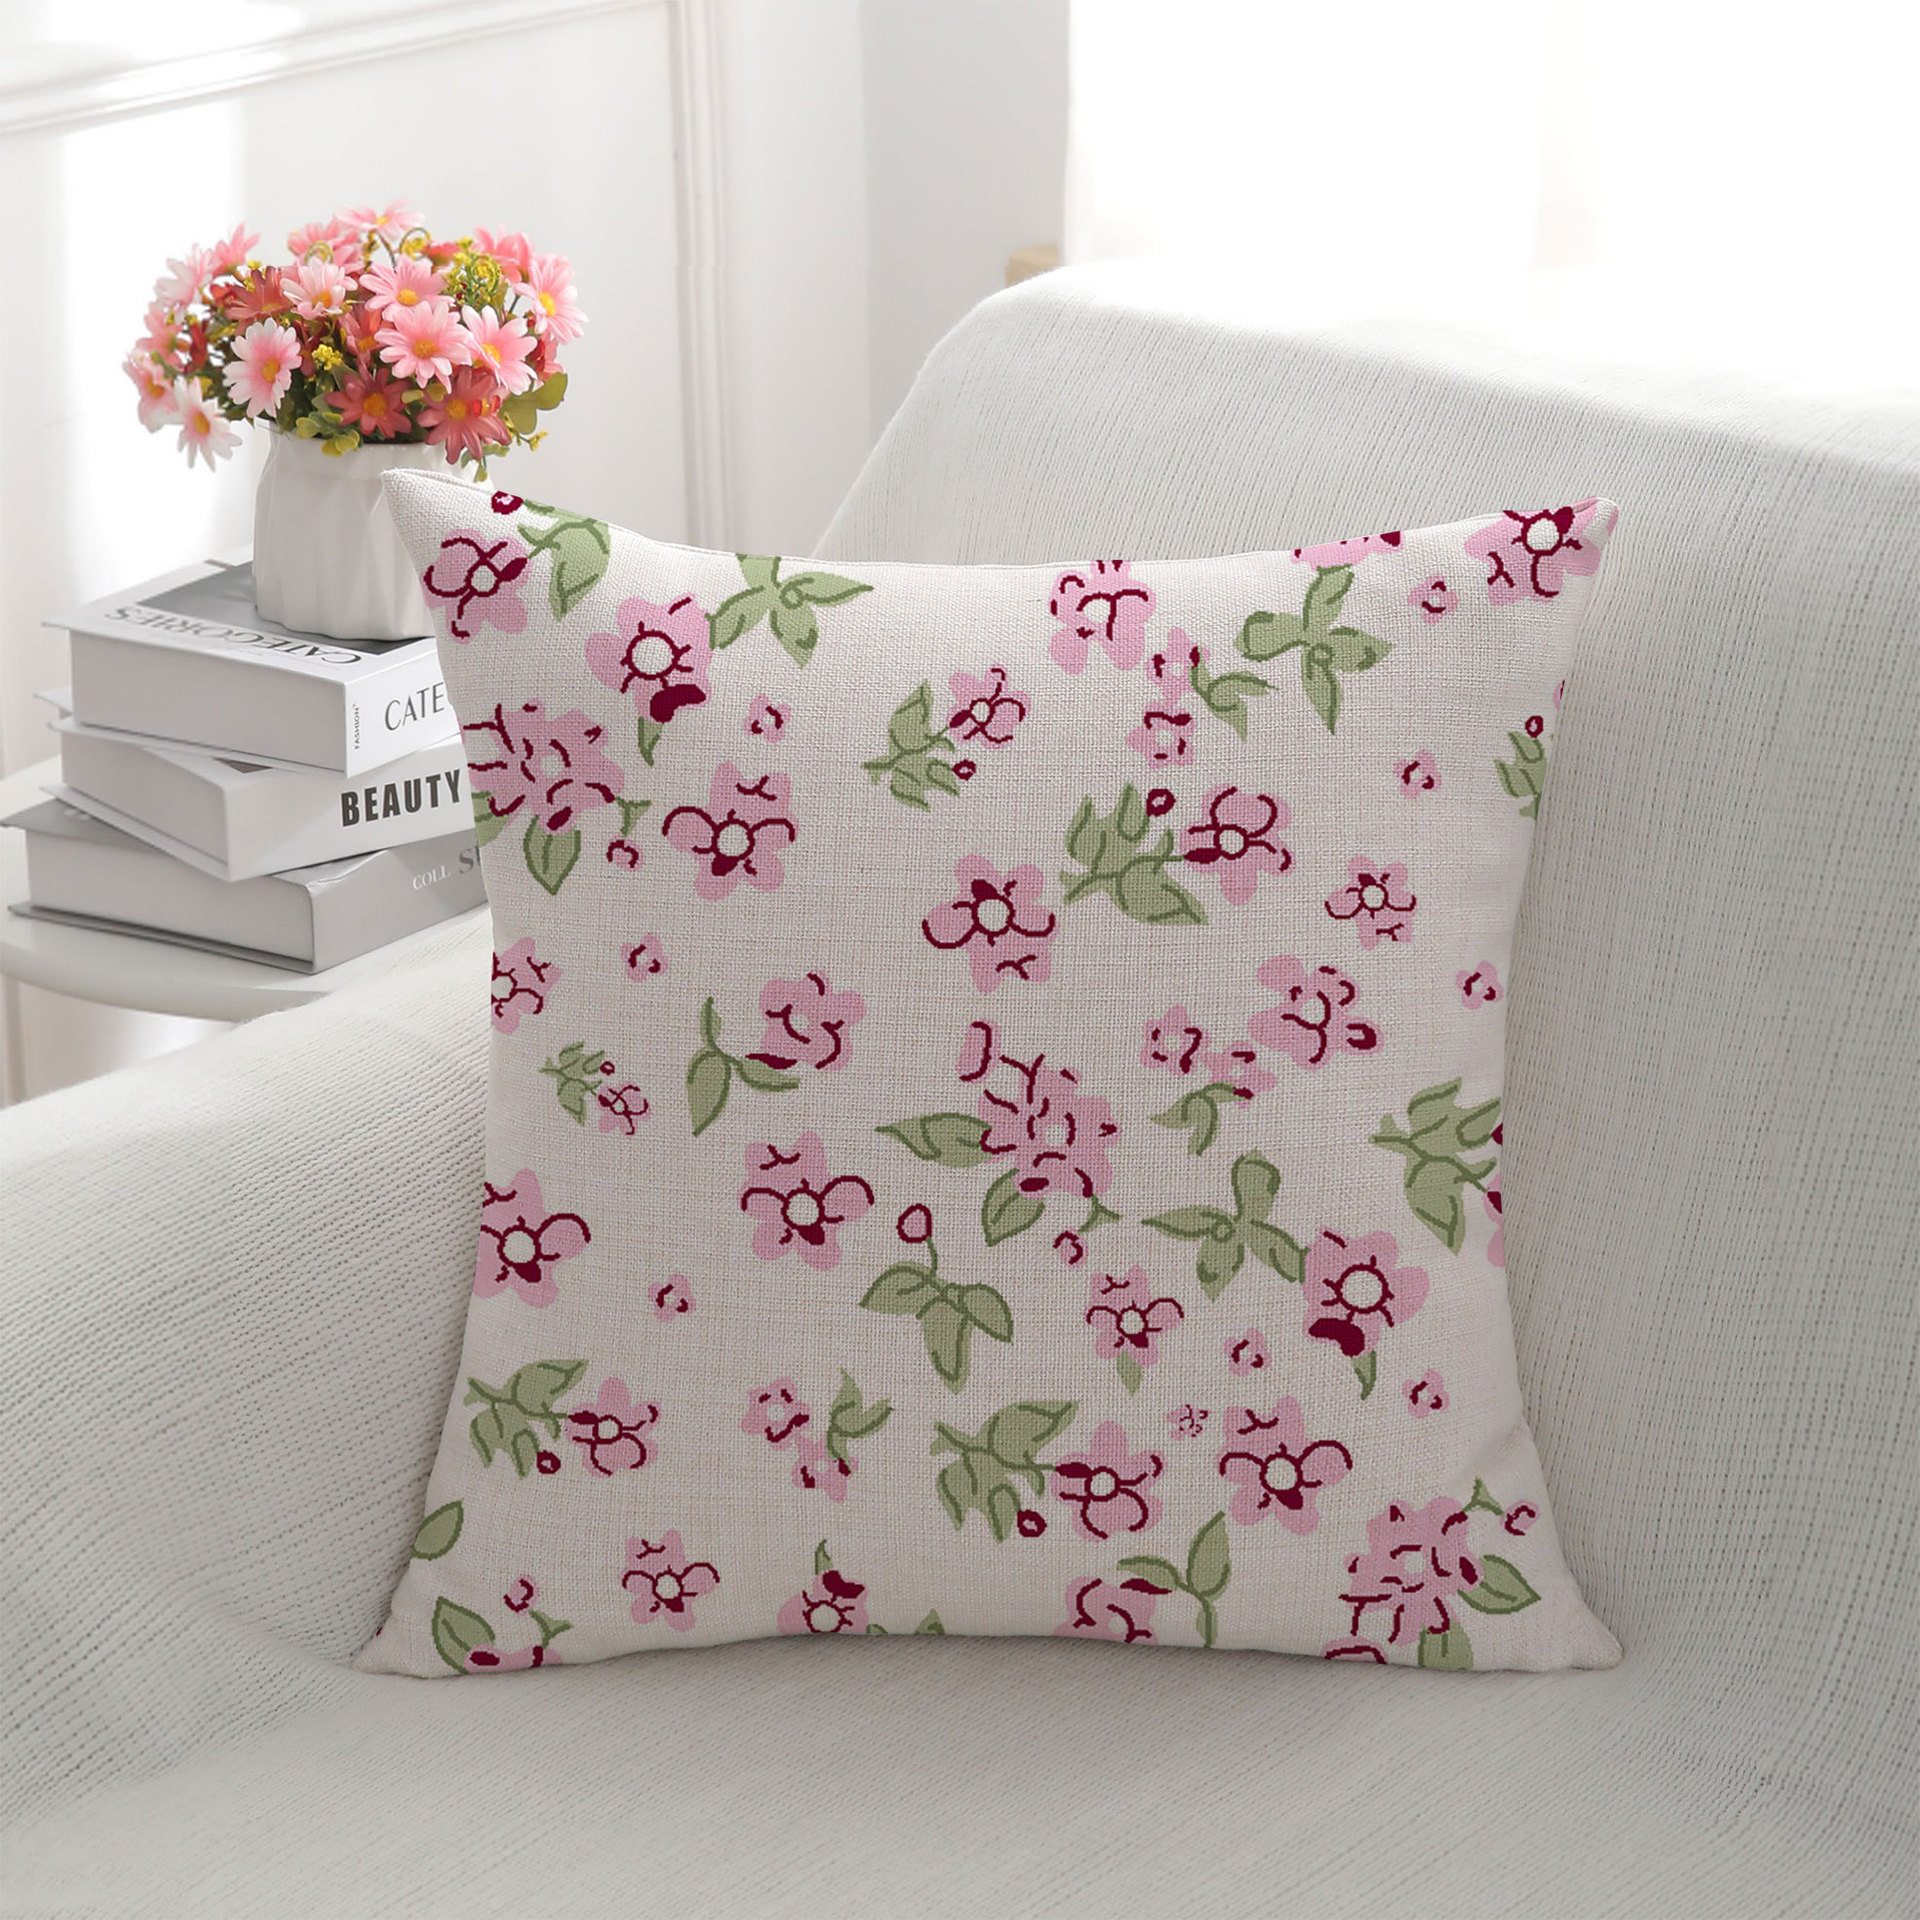 In Stock Wholesale Idyllic Minimalist Digital Printed Pillowcase Small Floral Bed & Breakfast Living Room Bay Window Pillow